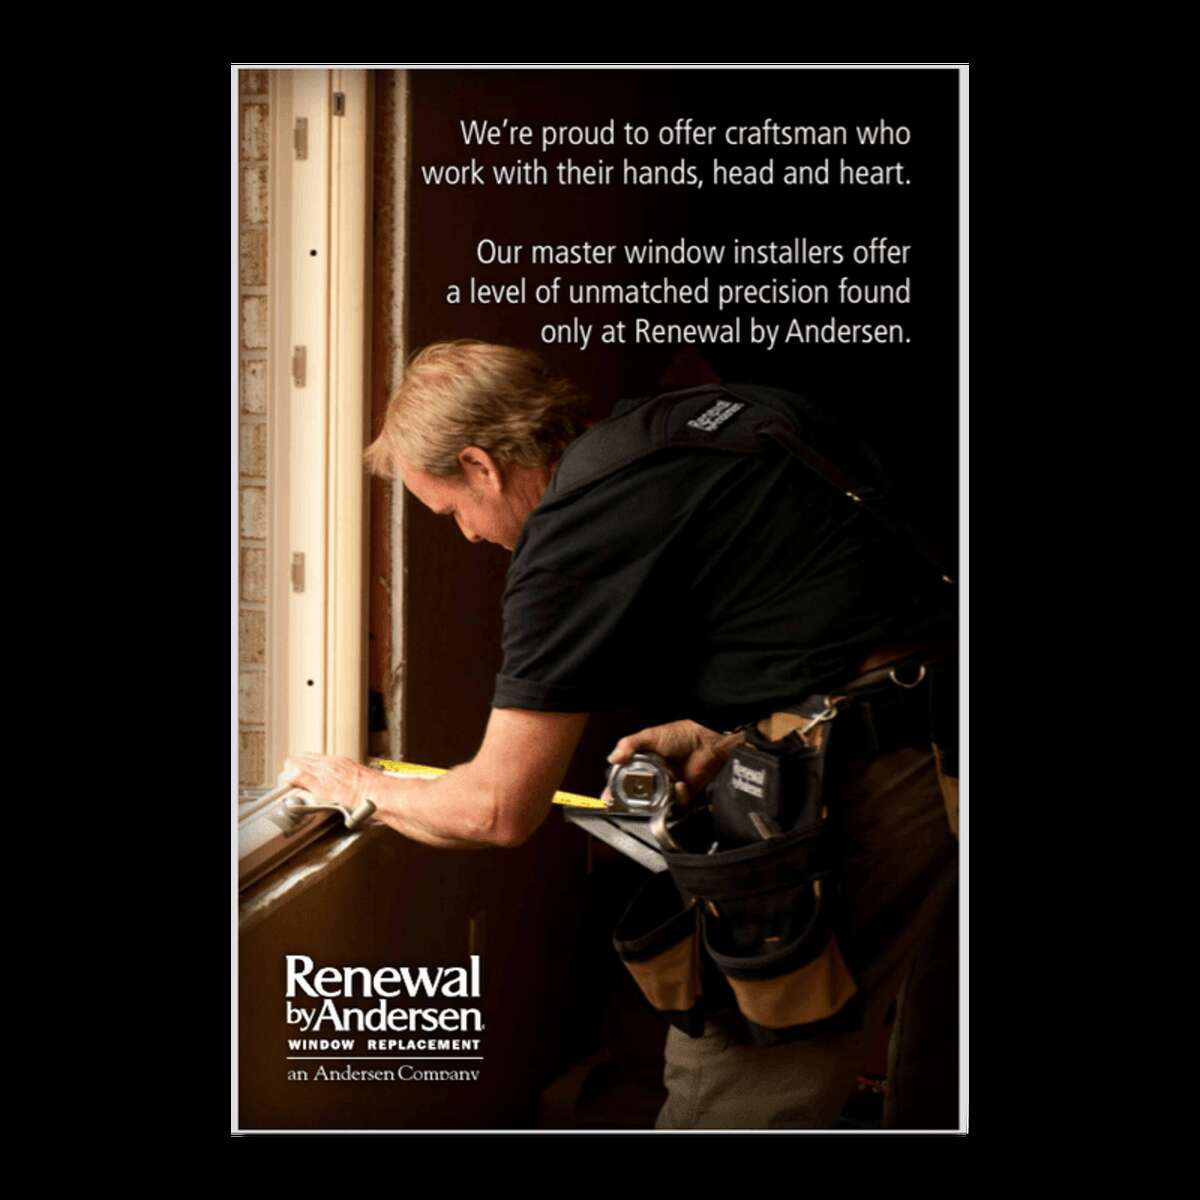 Renewal by Andersen High quality and performance, replacement windows and doors. Visit web site.